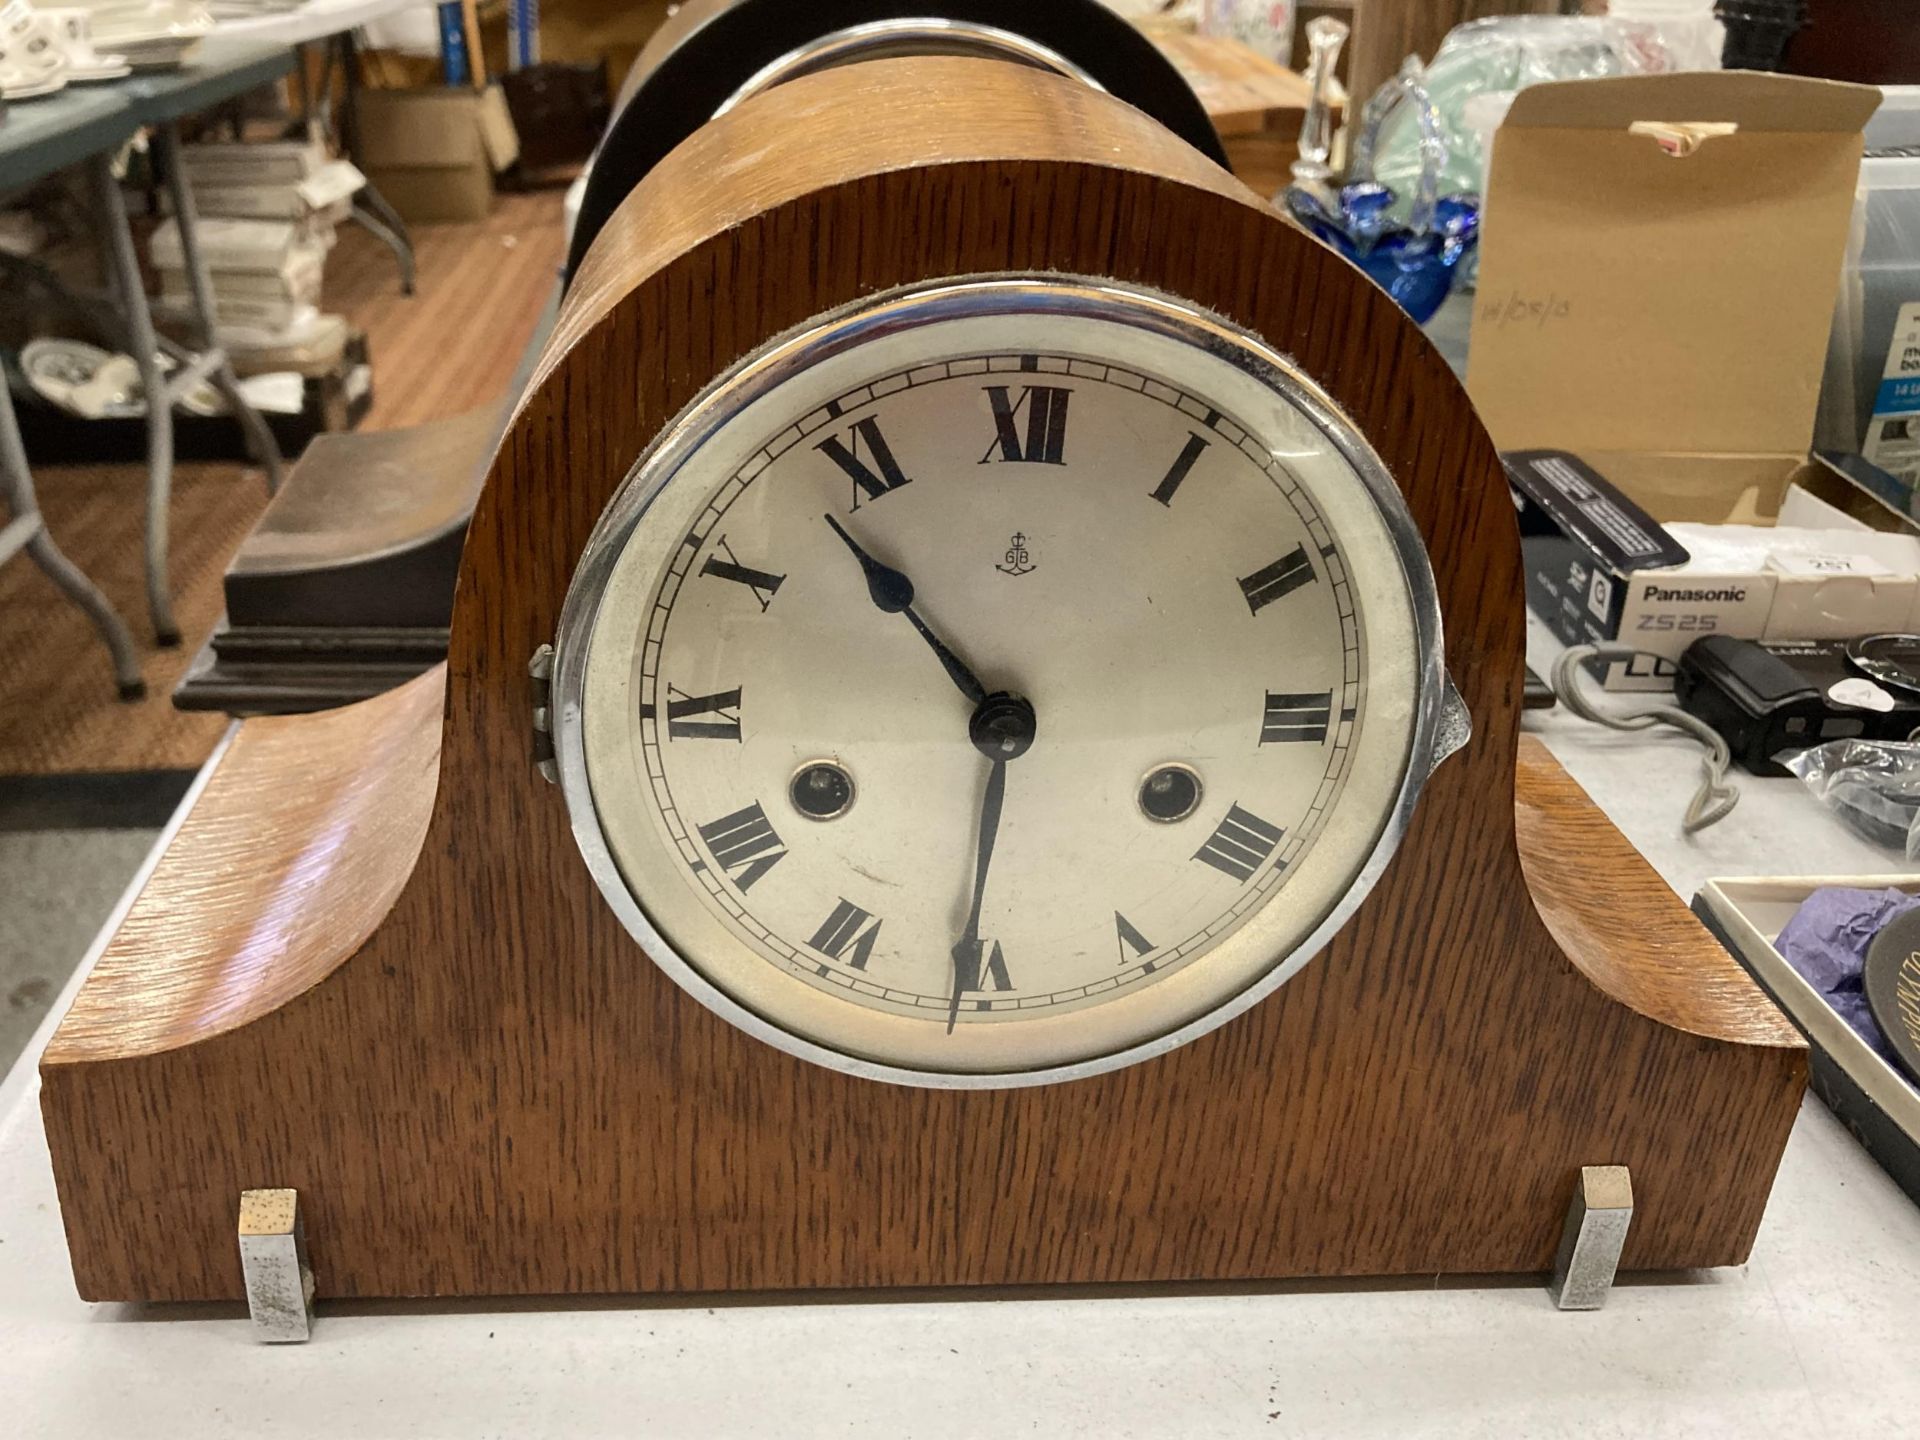 TWO VINTAGE MANTLE CLOCKS TO INCLUDE A BENTIMA, BOTH WITH PENDULUMS - Image 2 of 6